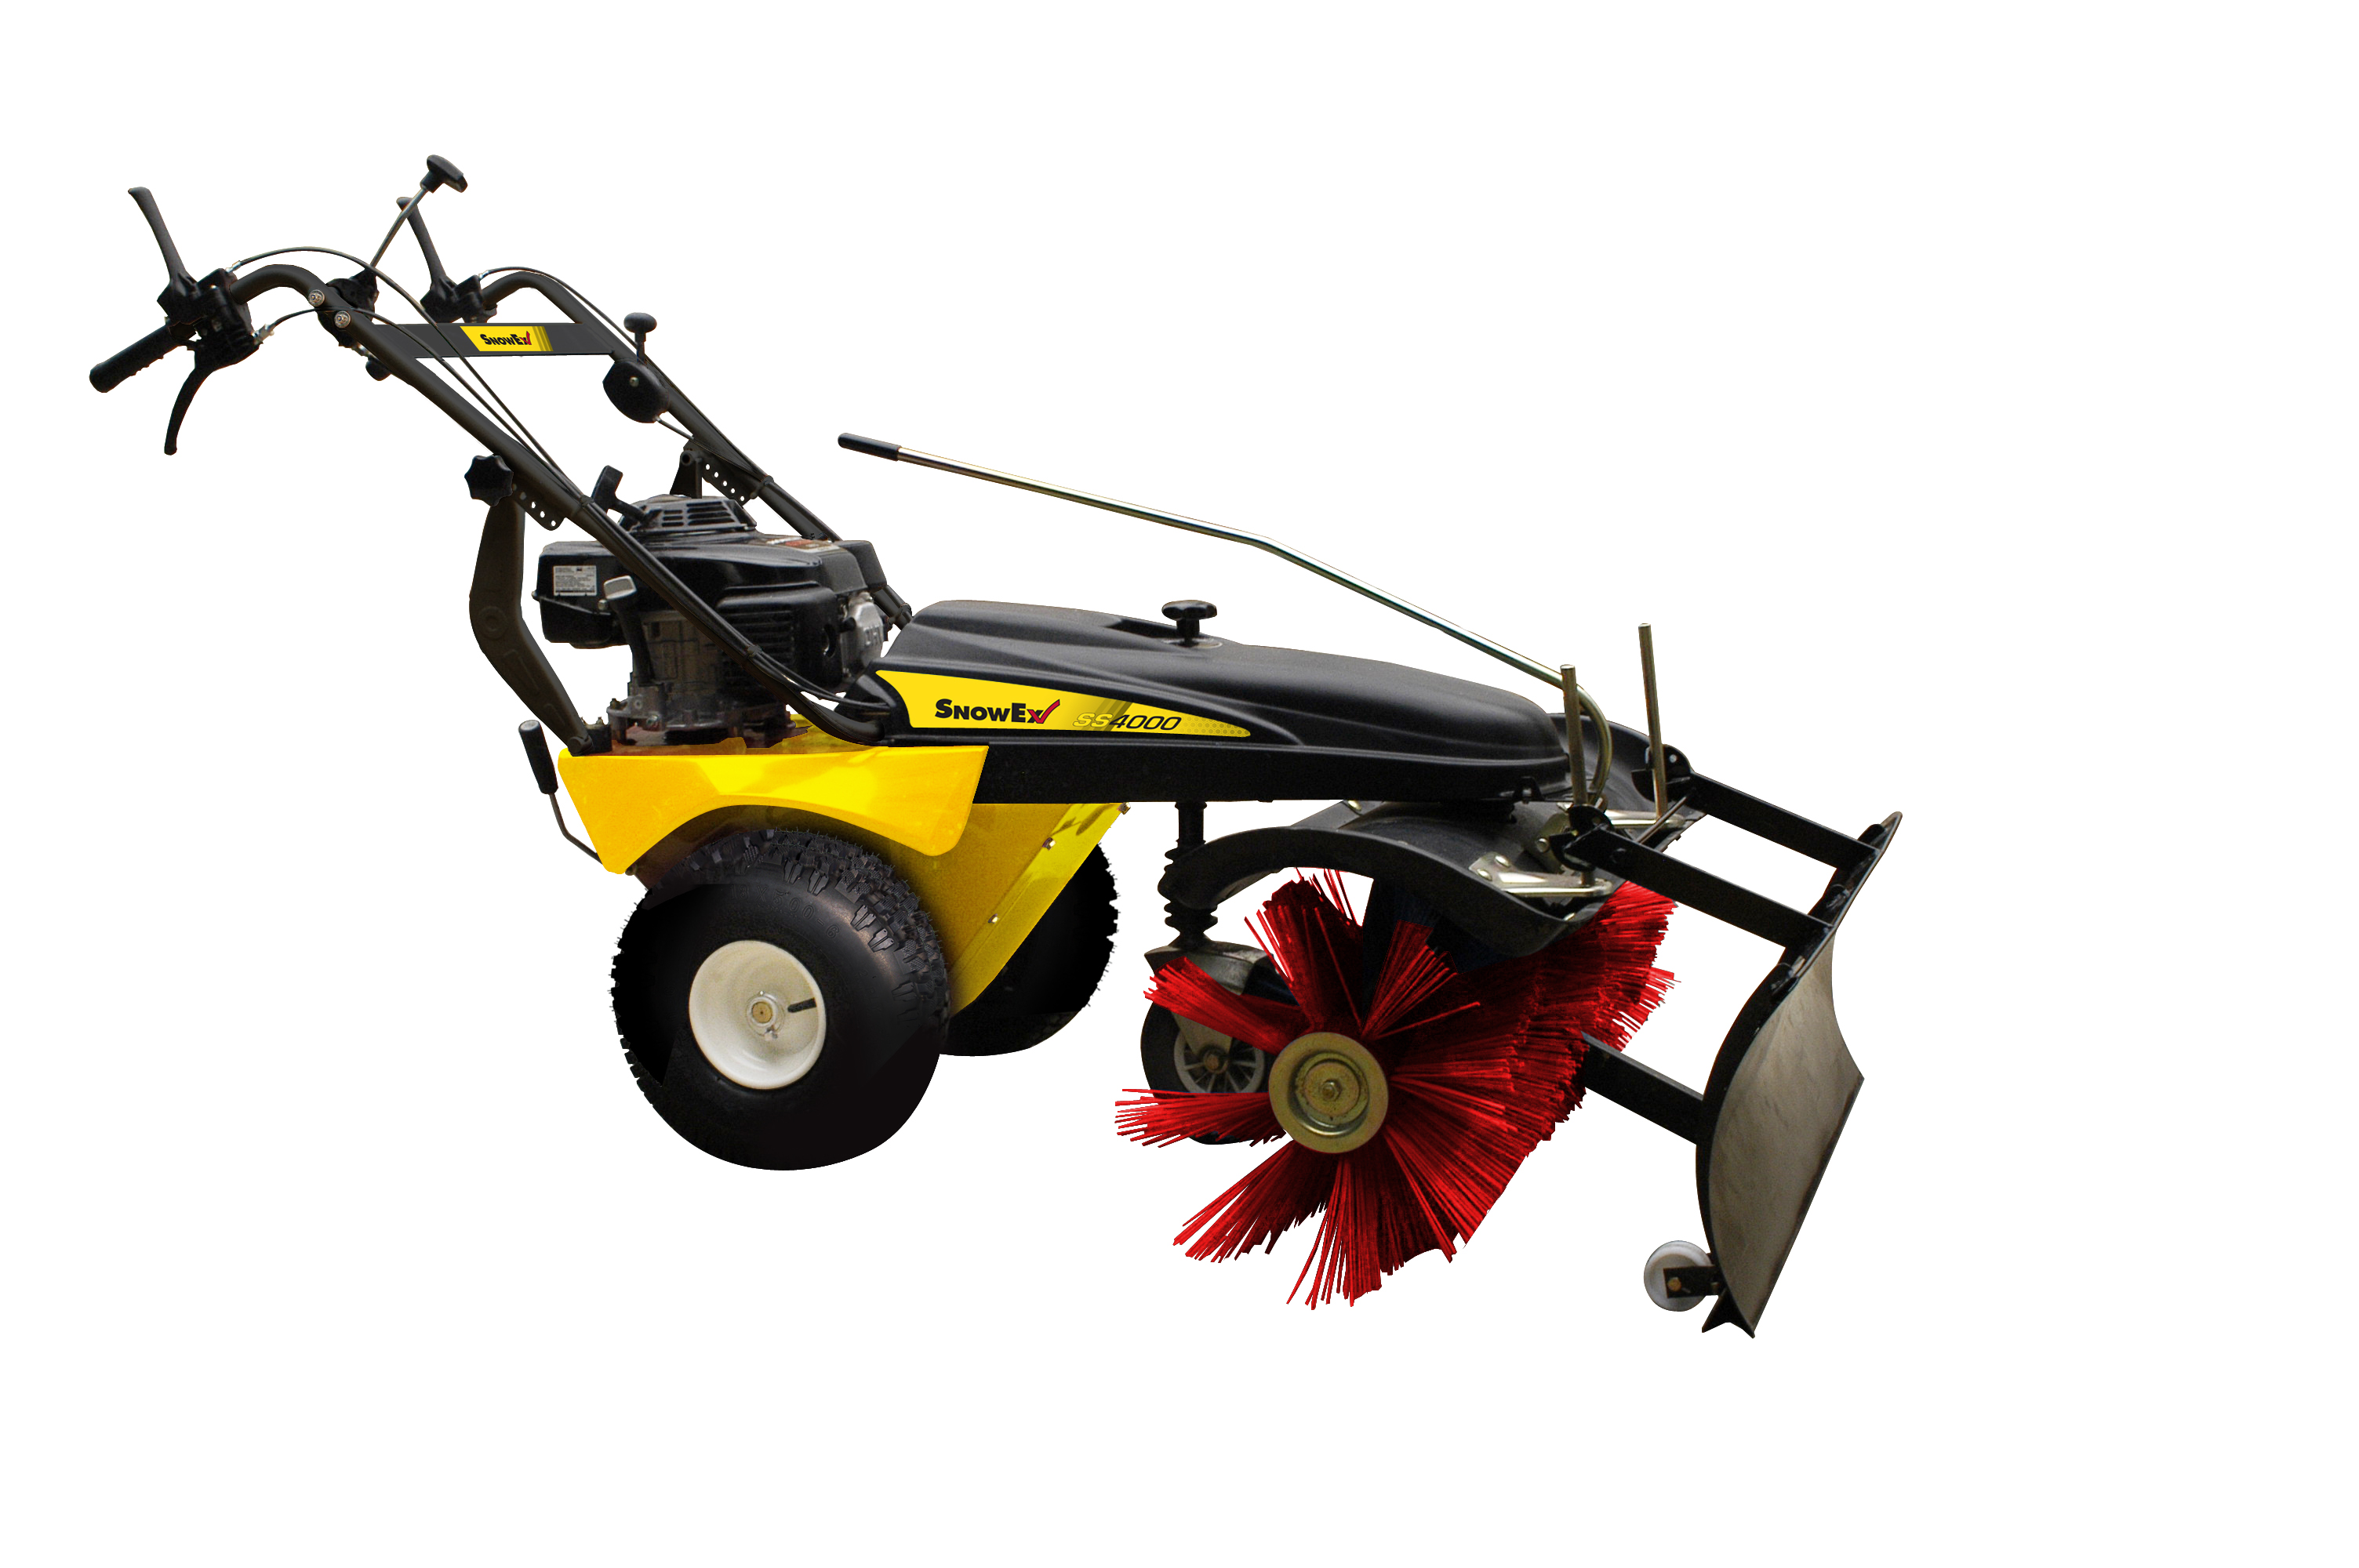 SnowEx's New Rotary Broom Provides Ideal Solution for Sidewalk Snow